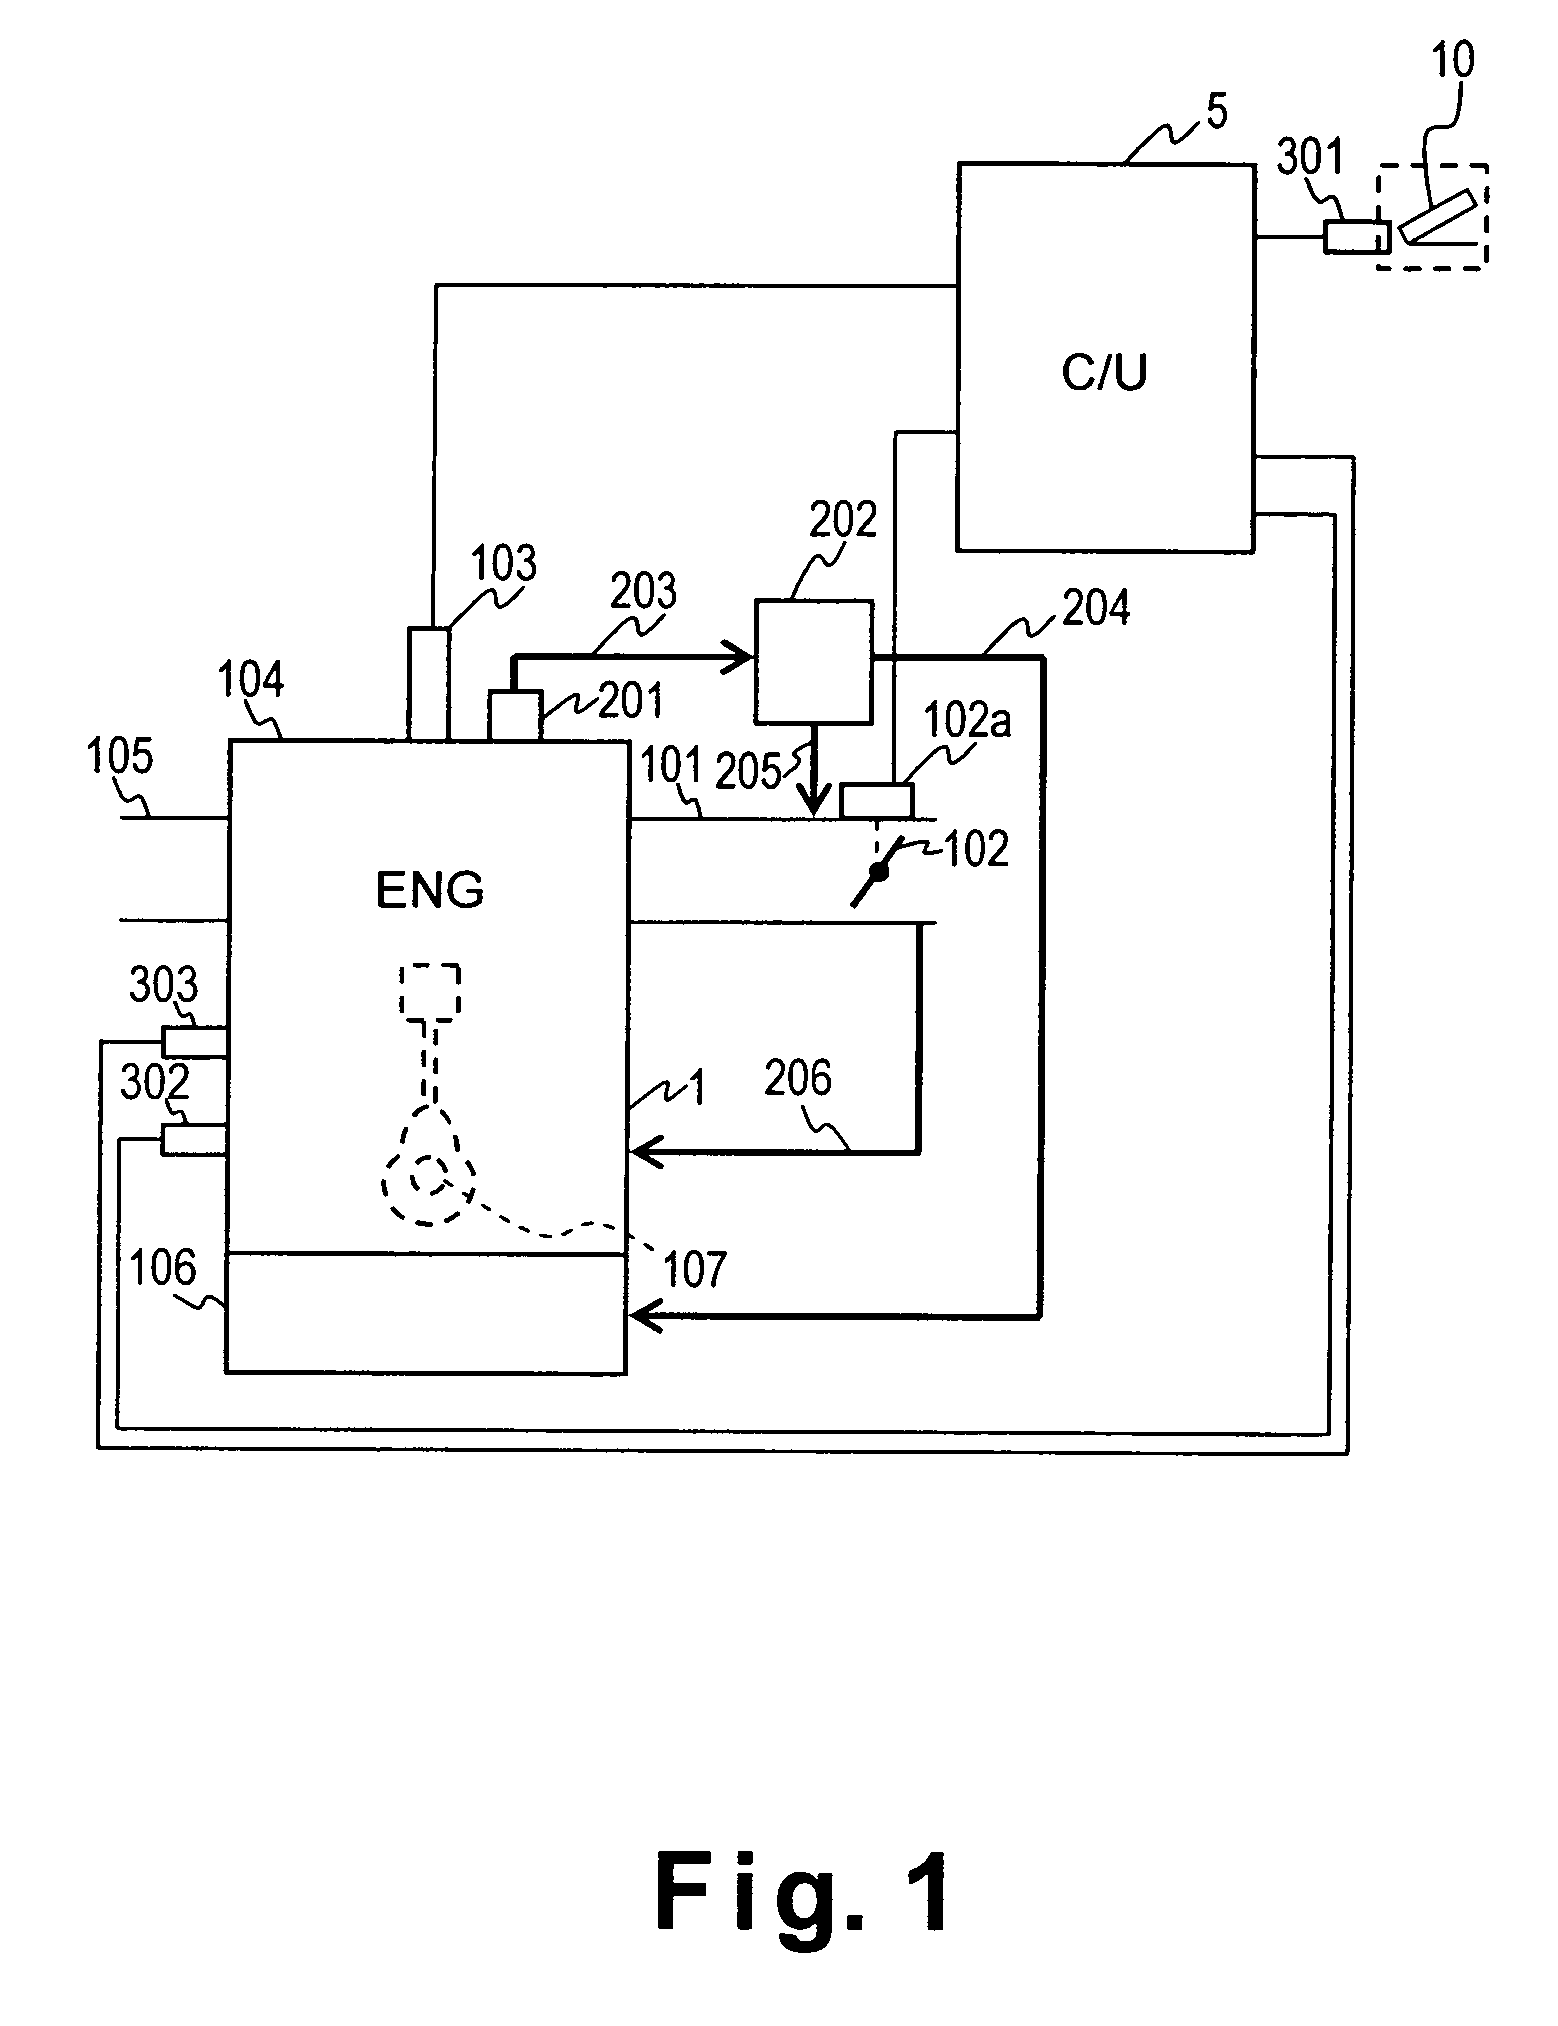 Diesel engine oil dilution managing device